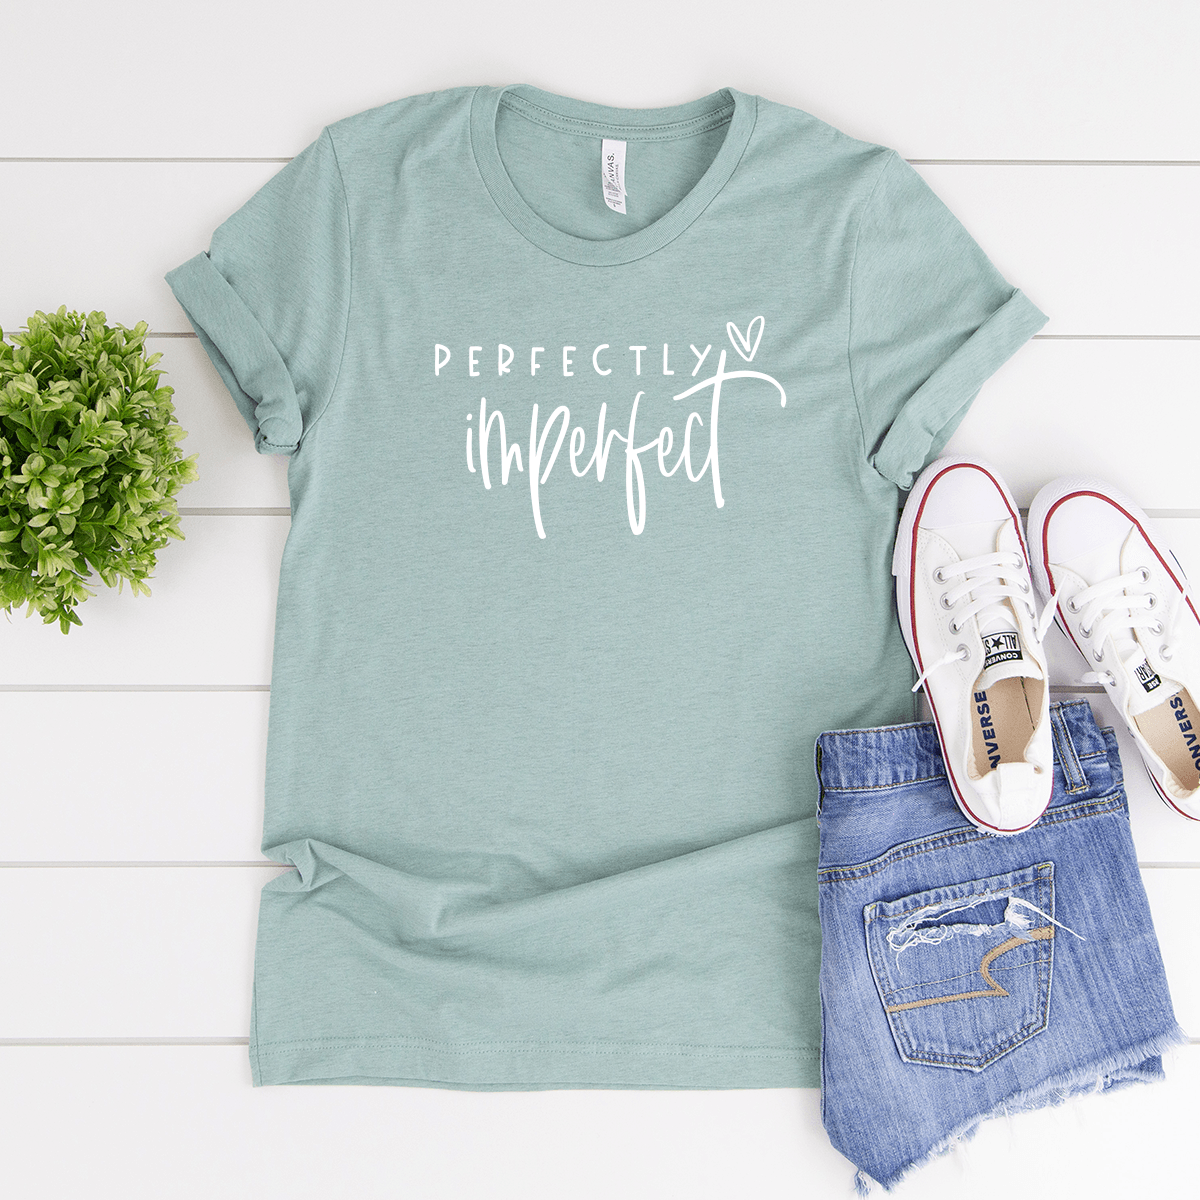 Perfectly Imperfect - Bella+Canvas Tee